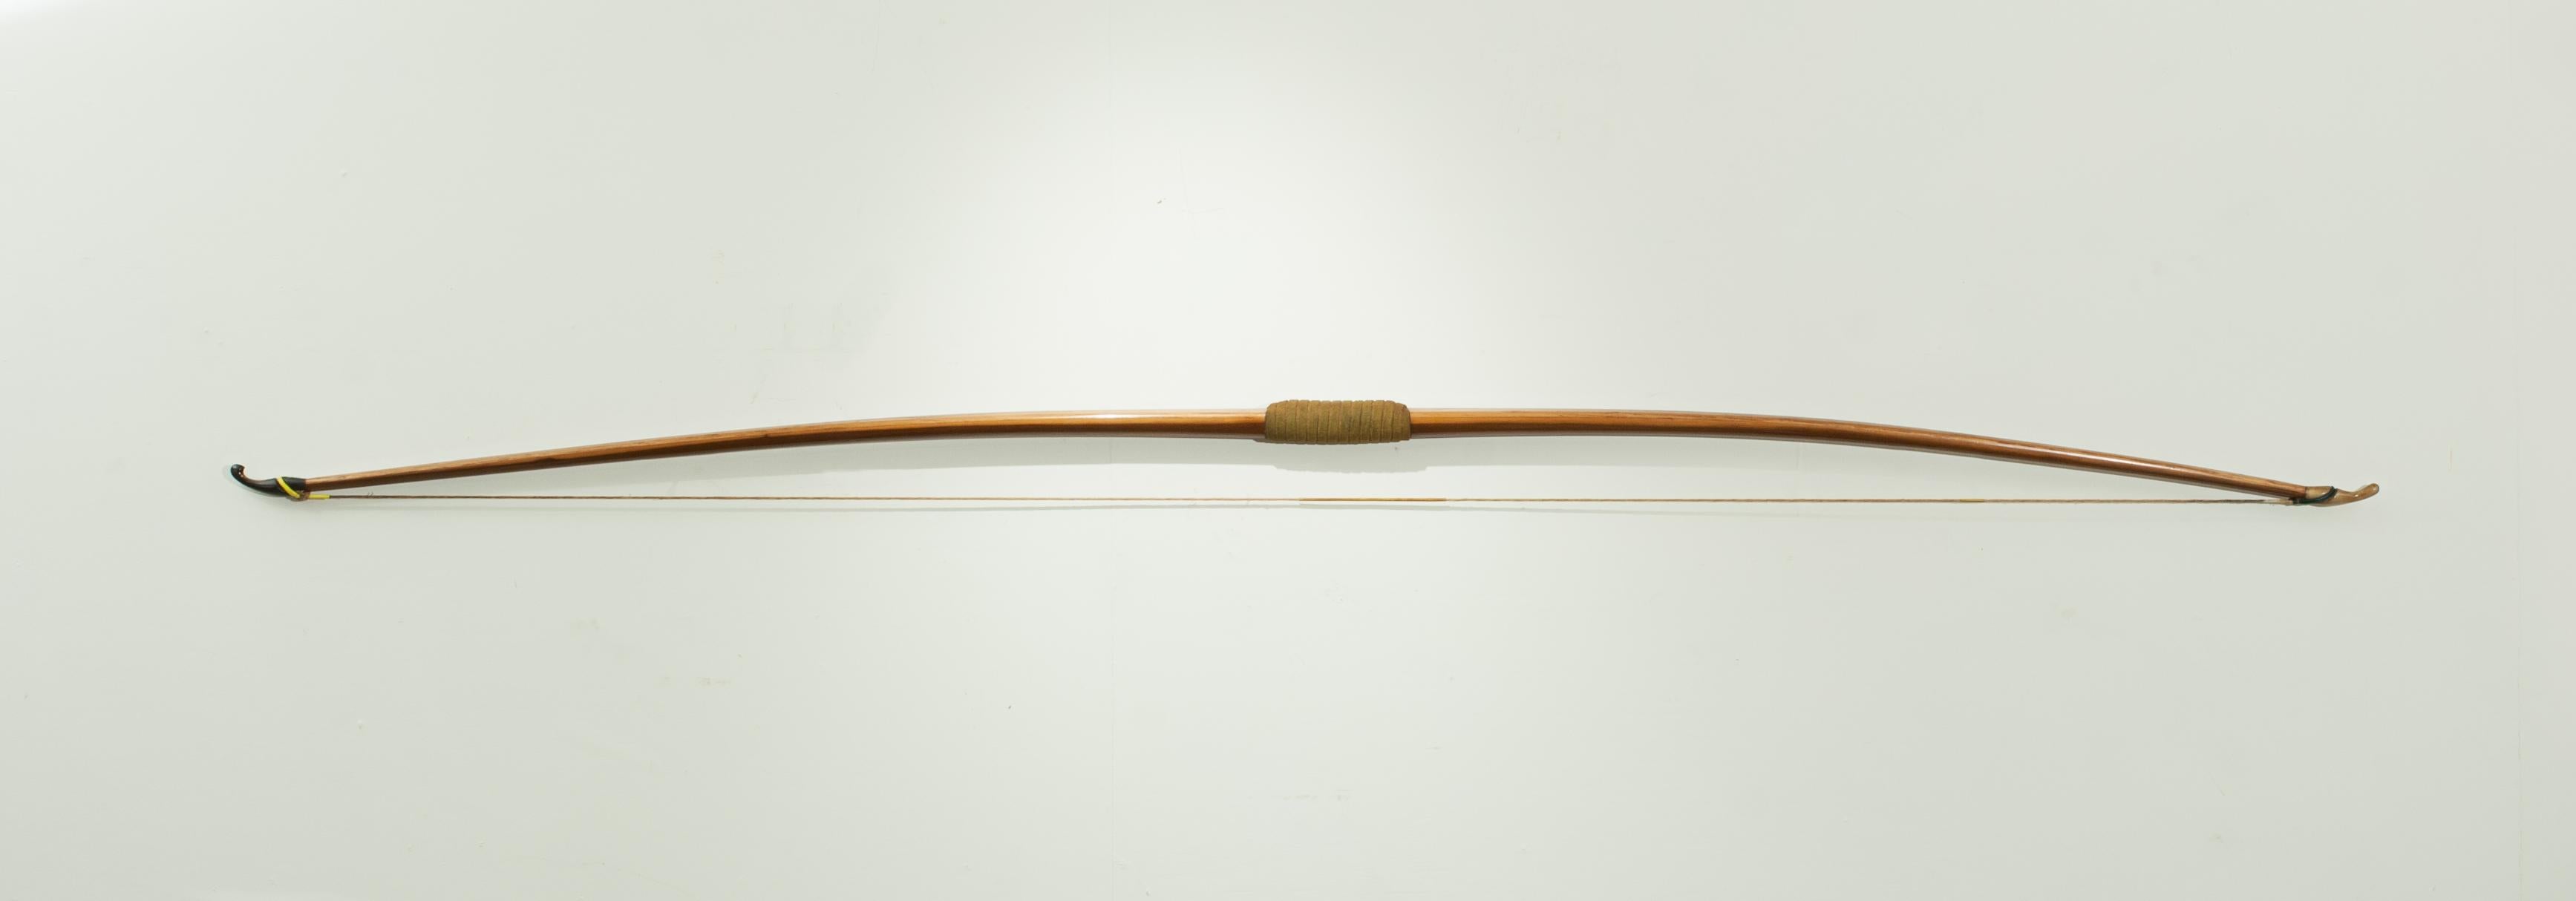 vintage wooden bow